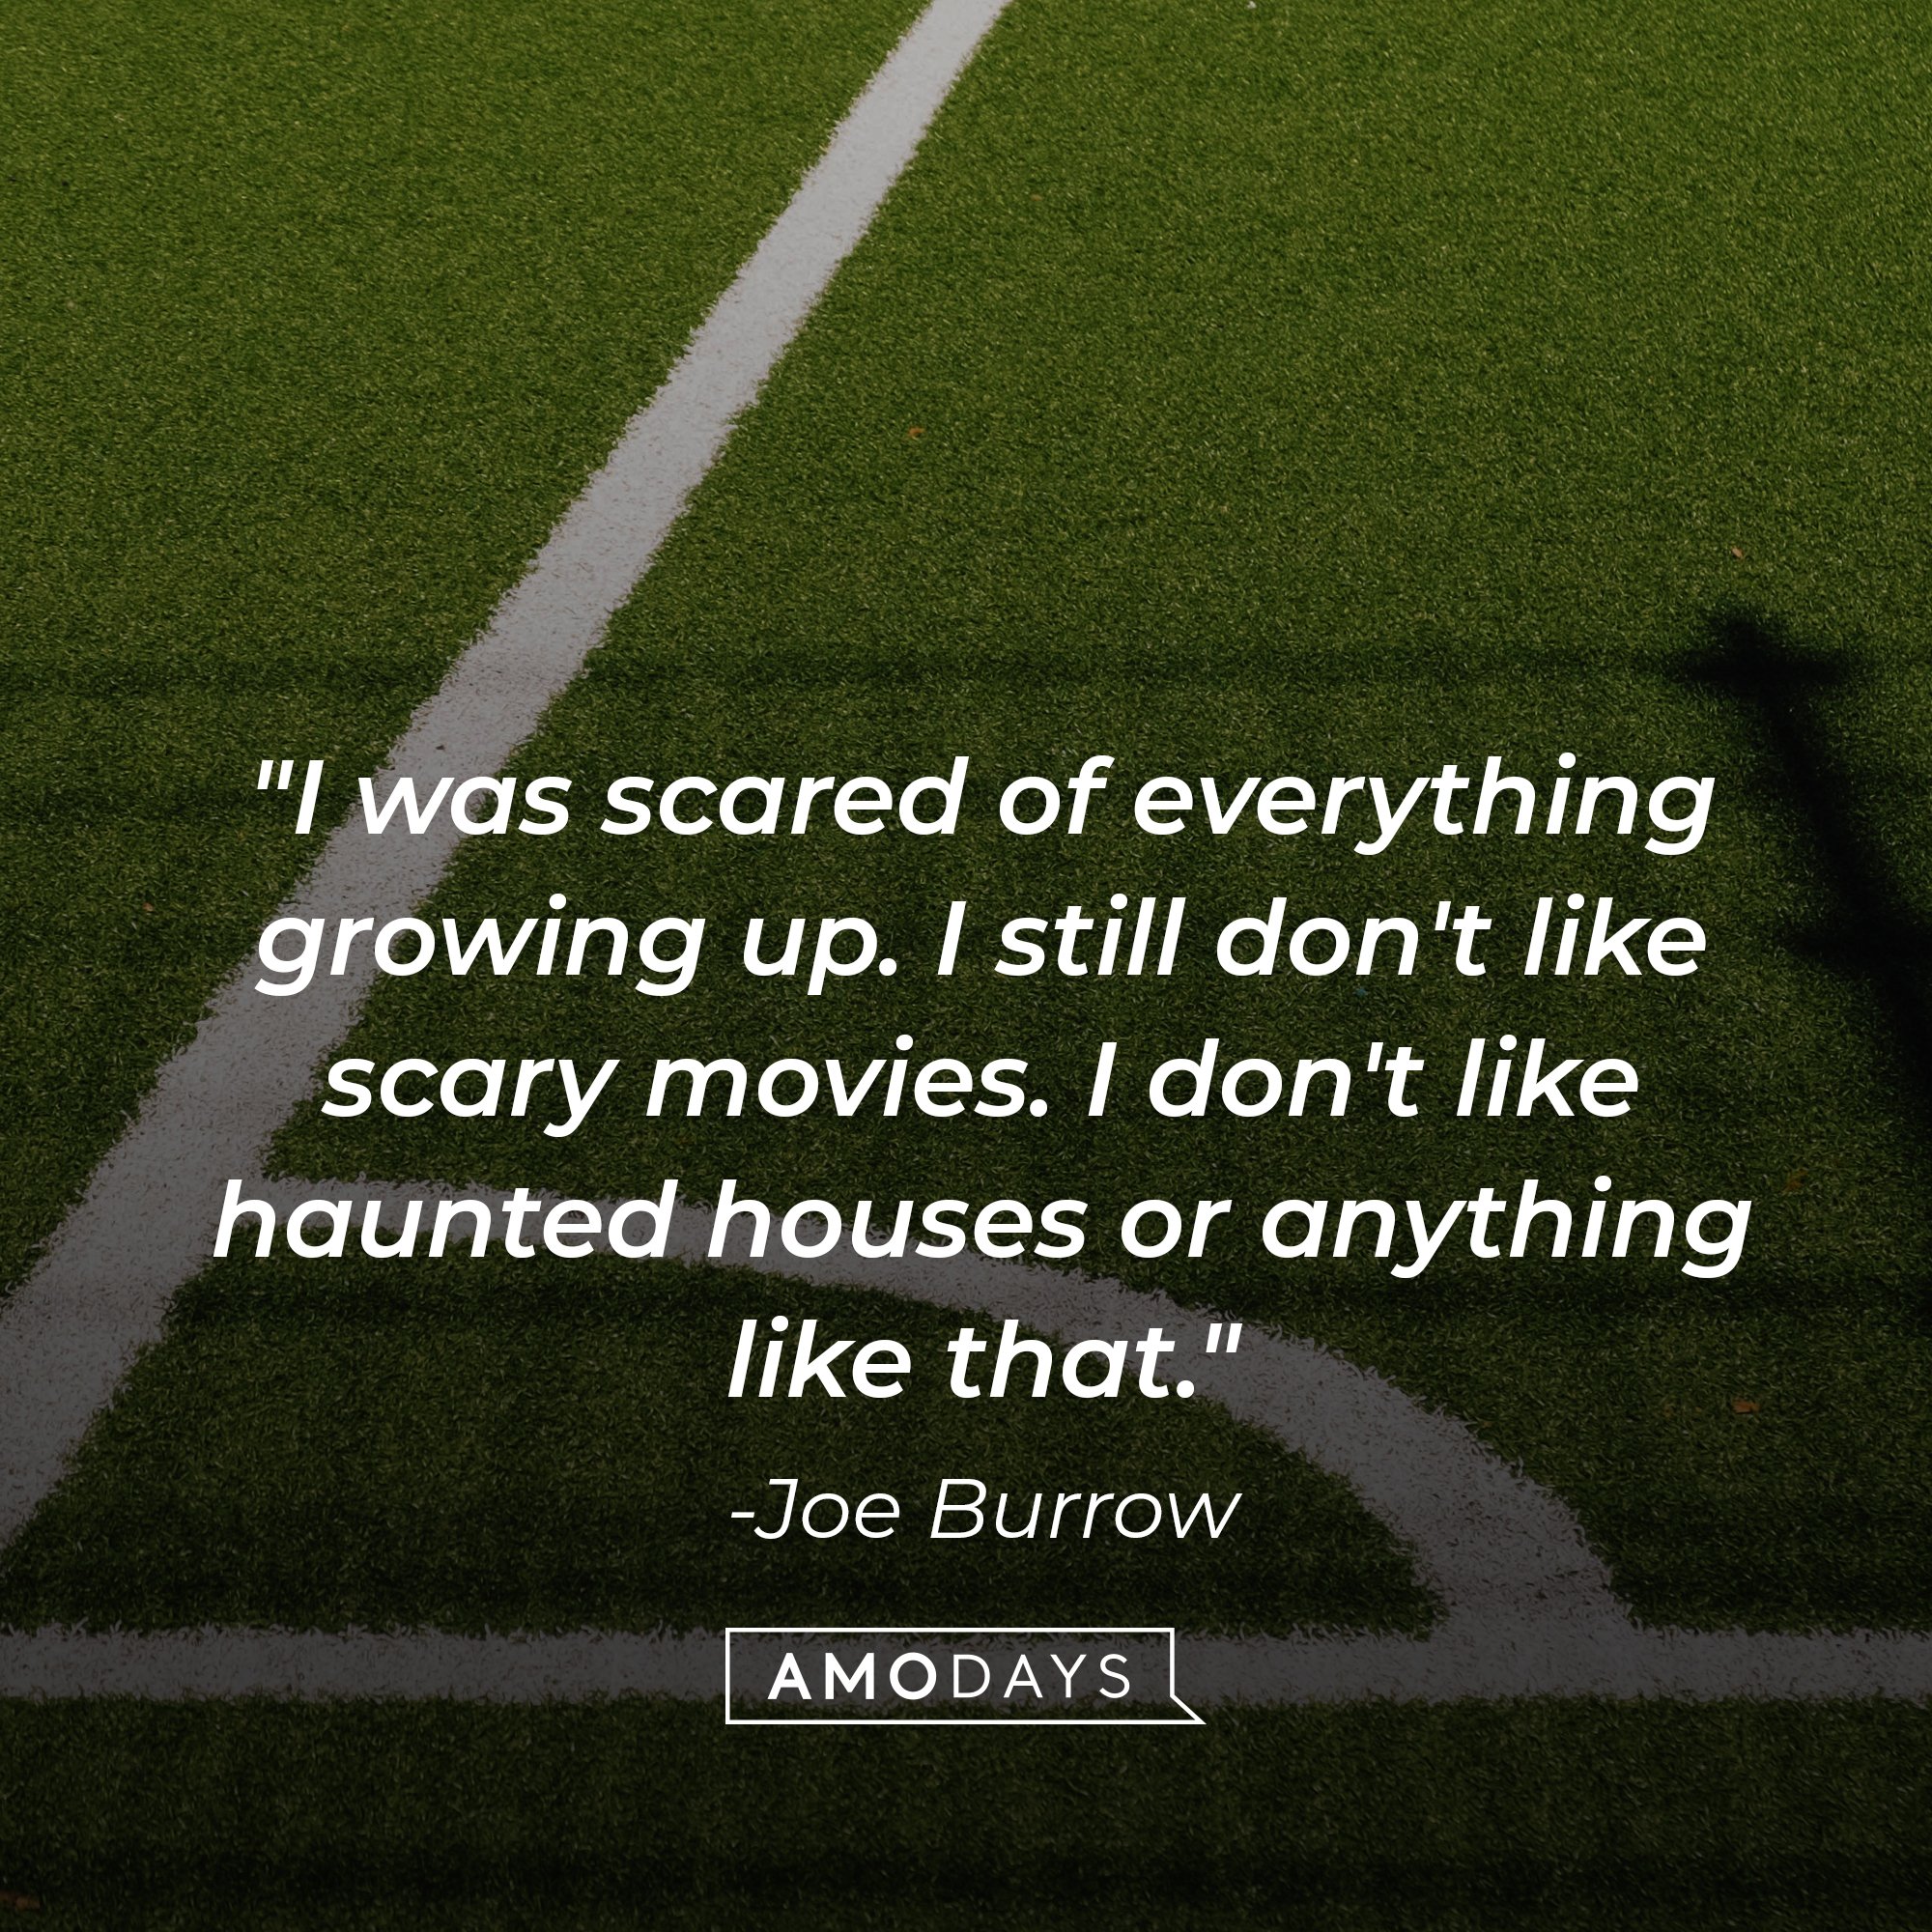  Joe Burrow's quote: "I was scared of everything growing up. I still don't like scary movies. I don't like haunted houses or anything like that.” | Image: AmoDays